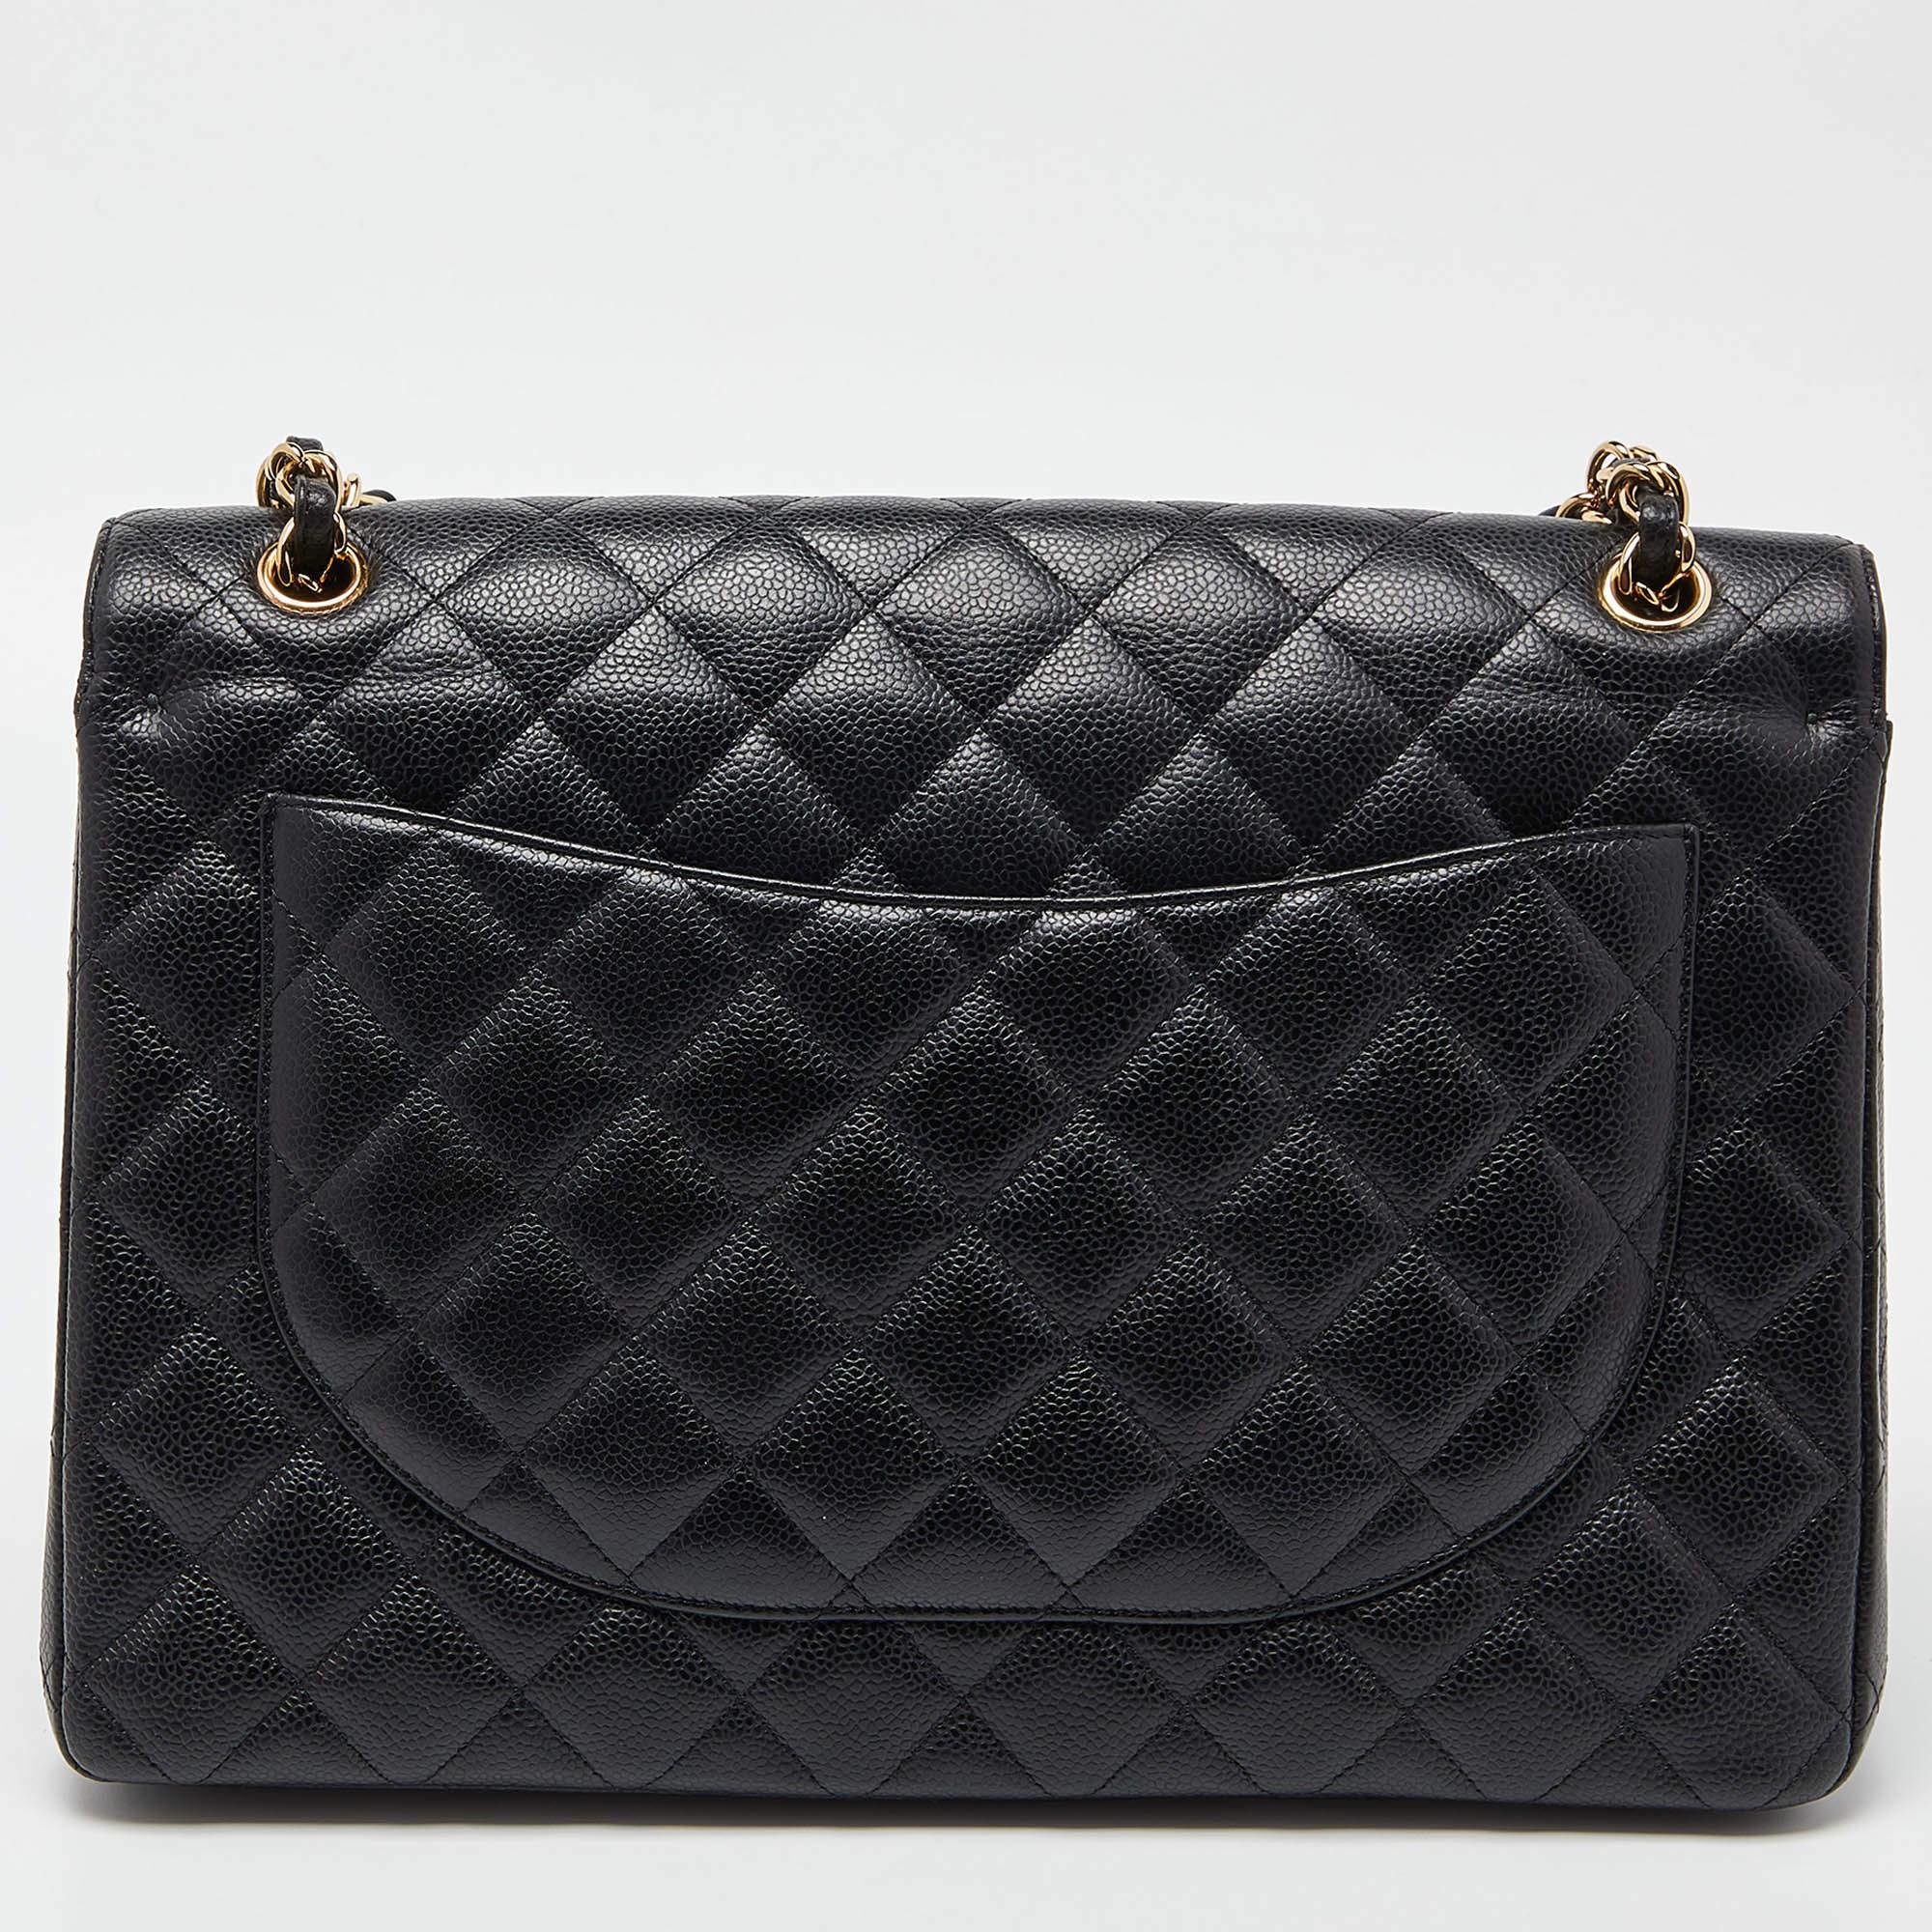 We're bringing Chanel's iconic Classic Flap bag to your closet with this beautiful creation. Exquisitely crafted from quilted leather, it bears the signature label inside the leather interior and the iconic CC turn-lock on the flap. The Chanel bag